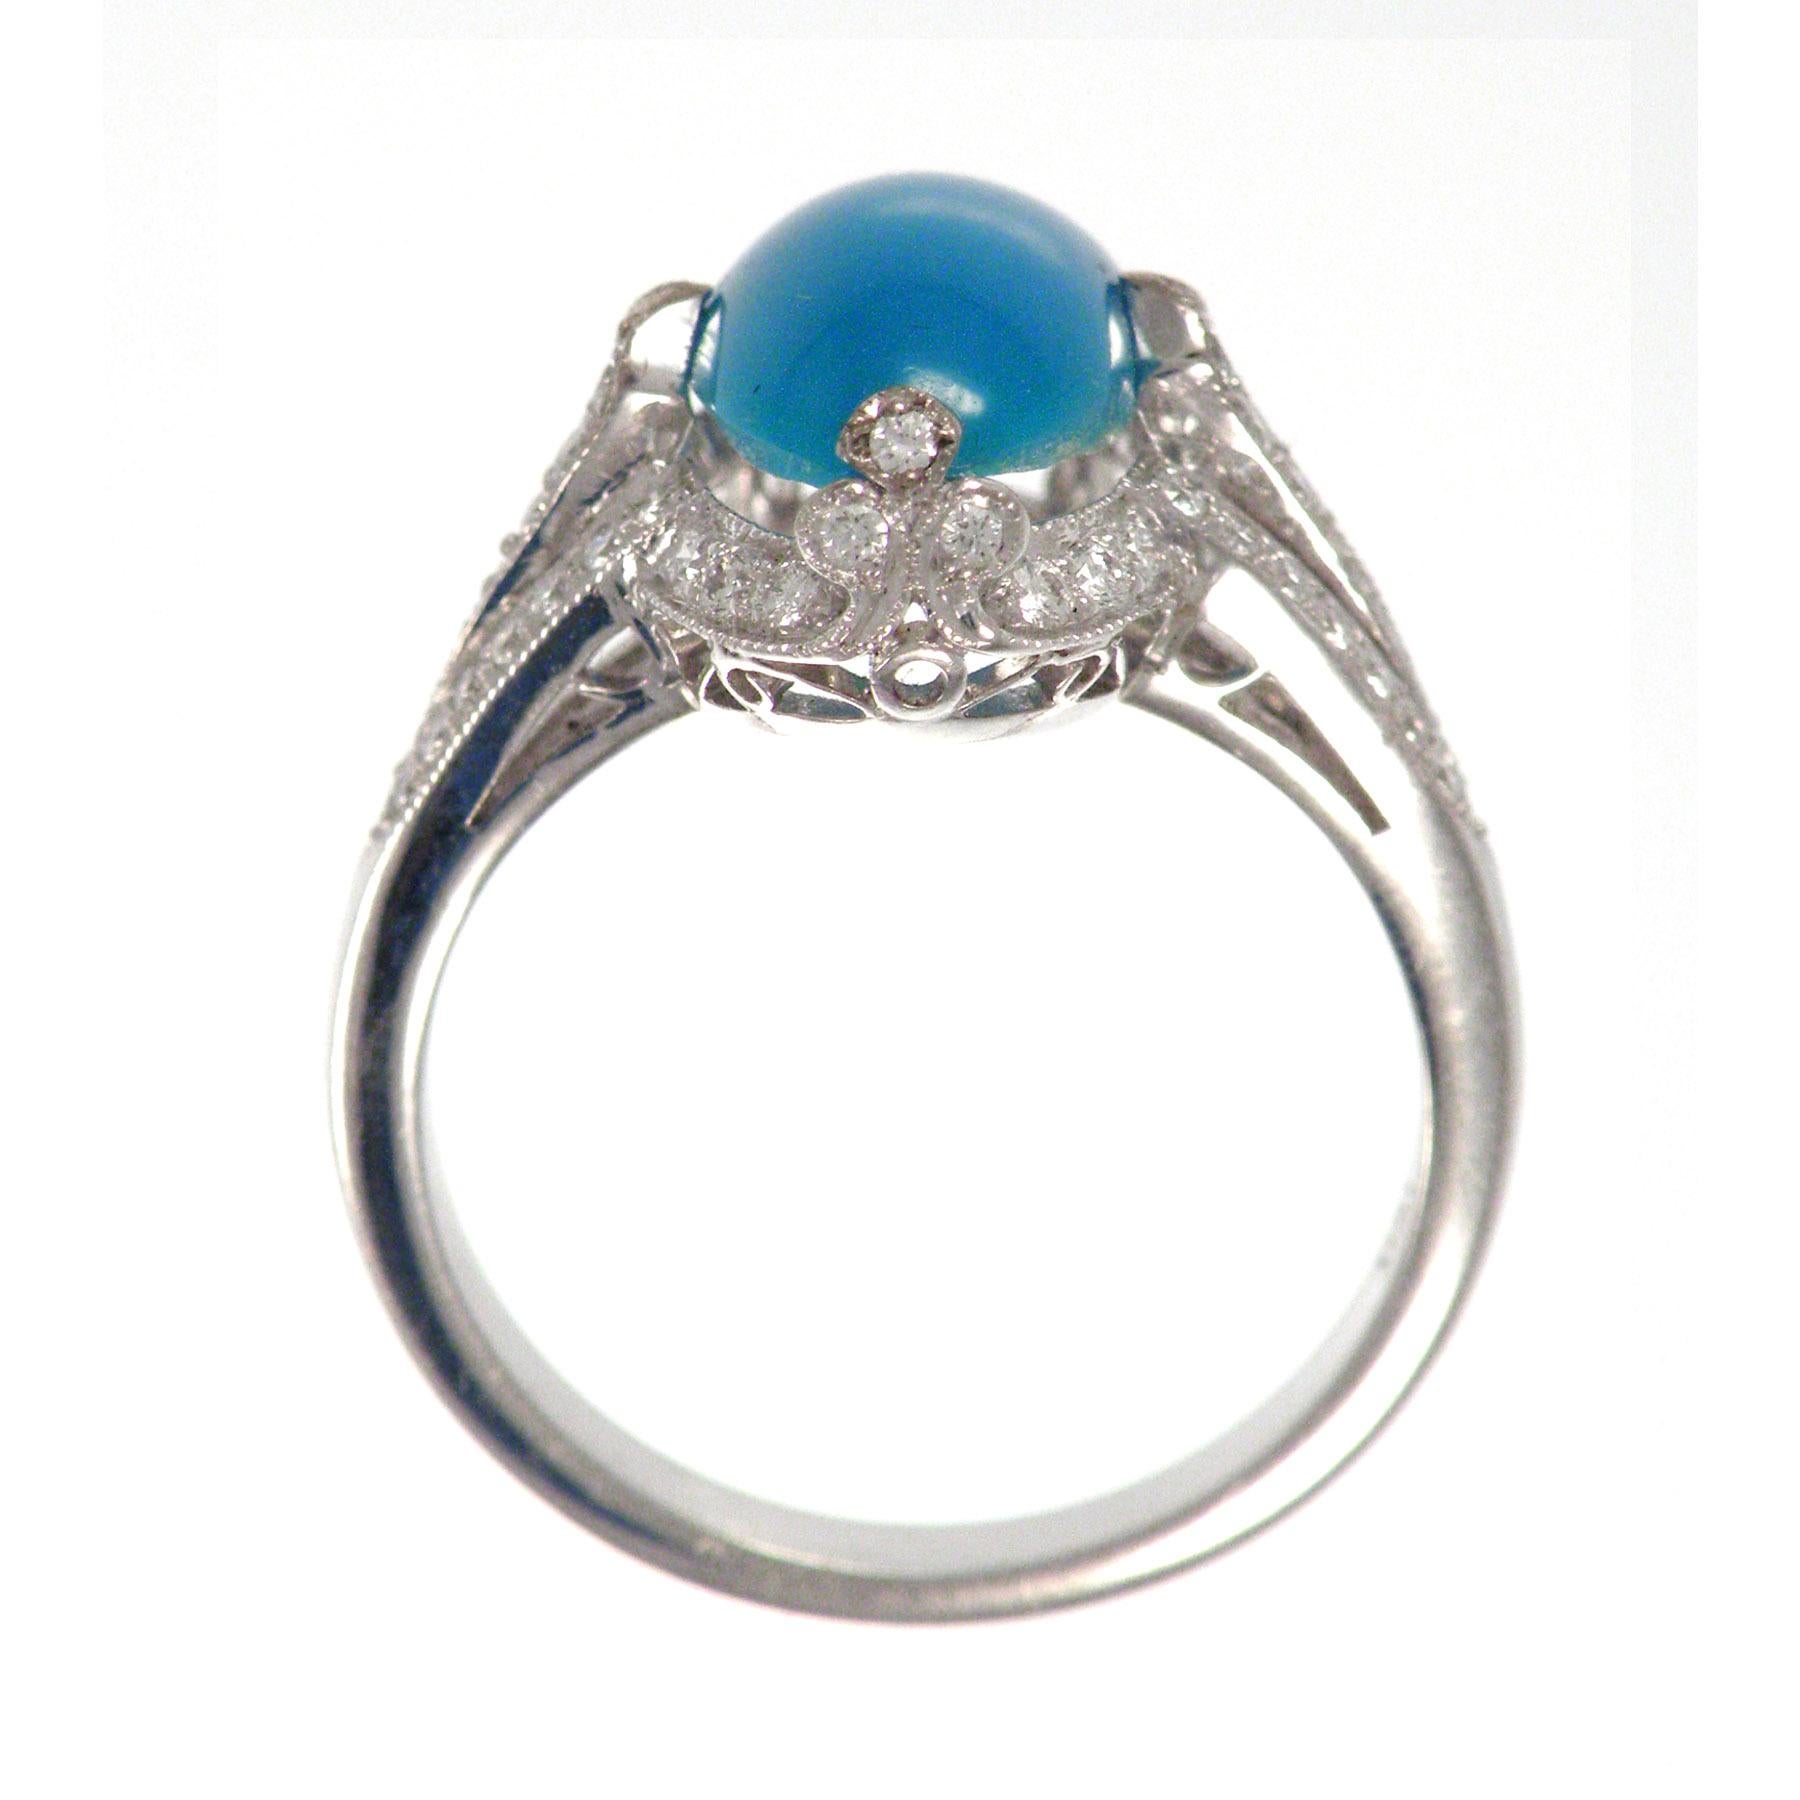 Antique style in Art Deco design 
with Turquoise and Diamond
Has been kept in an excellent condition
Ring Size 6.5